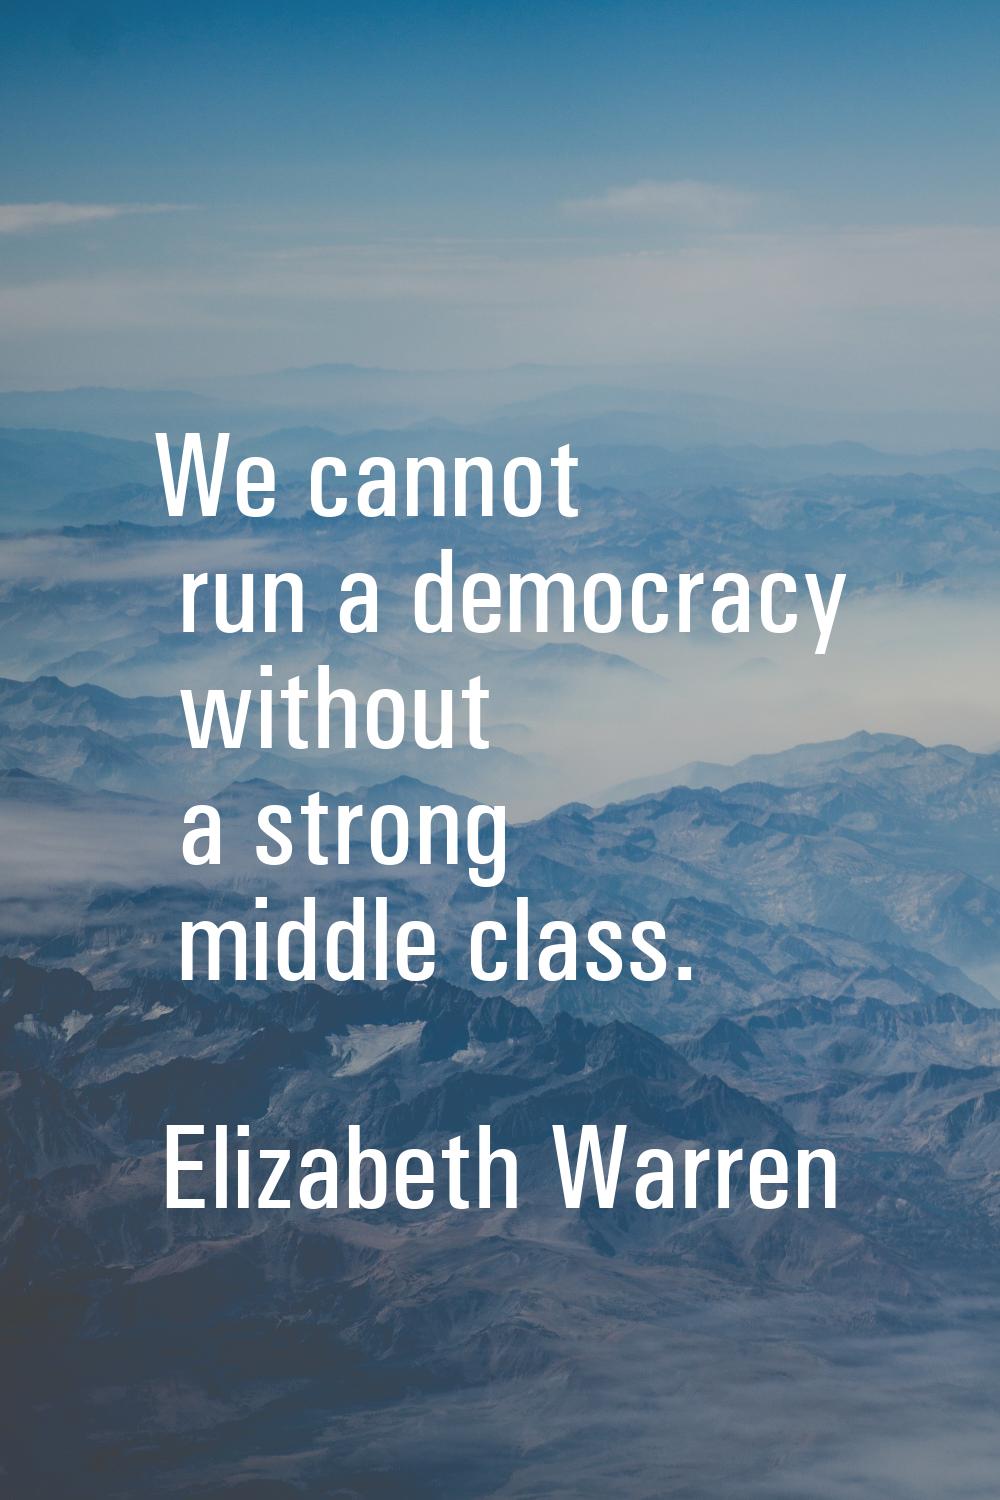 We cannot run a democracy without a strong middle class.